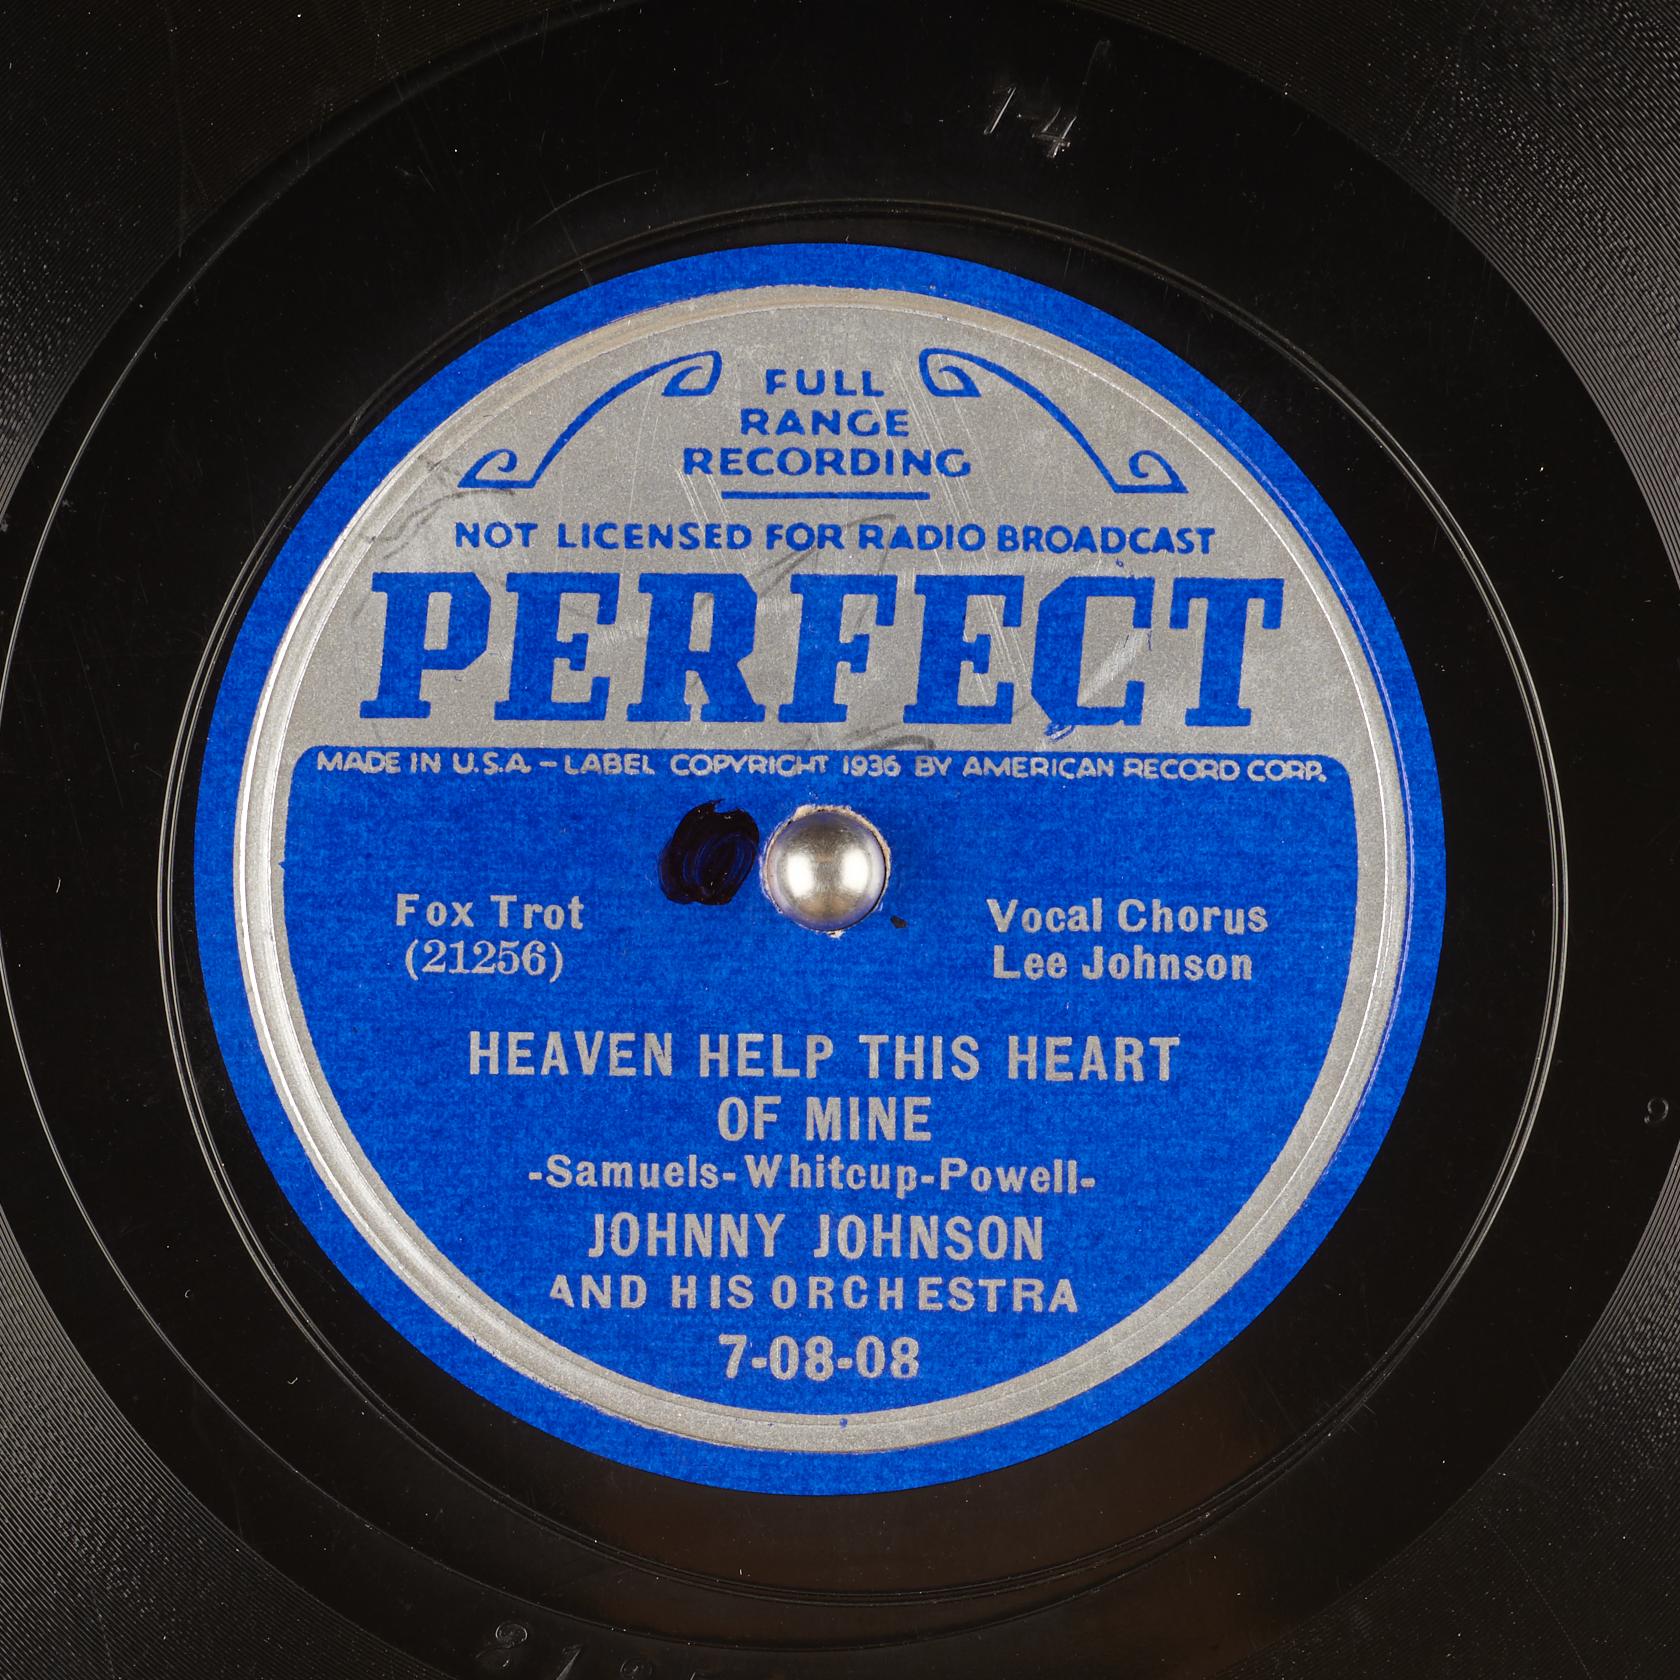 Heaven-help-this-heart-of-mine_johnny-johnson-and-his-orchestra-lee-johnson vocals, PERFECT # 7-08-08 record label